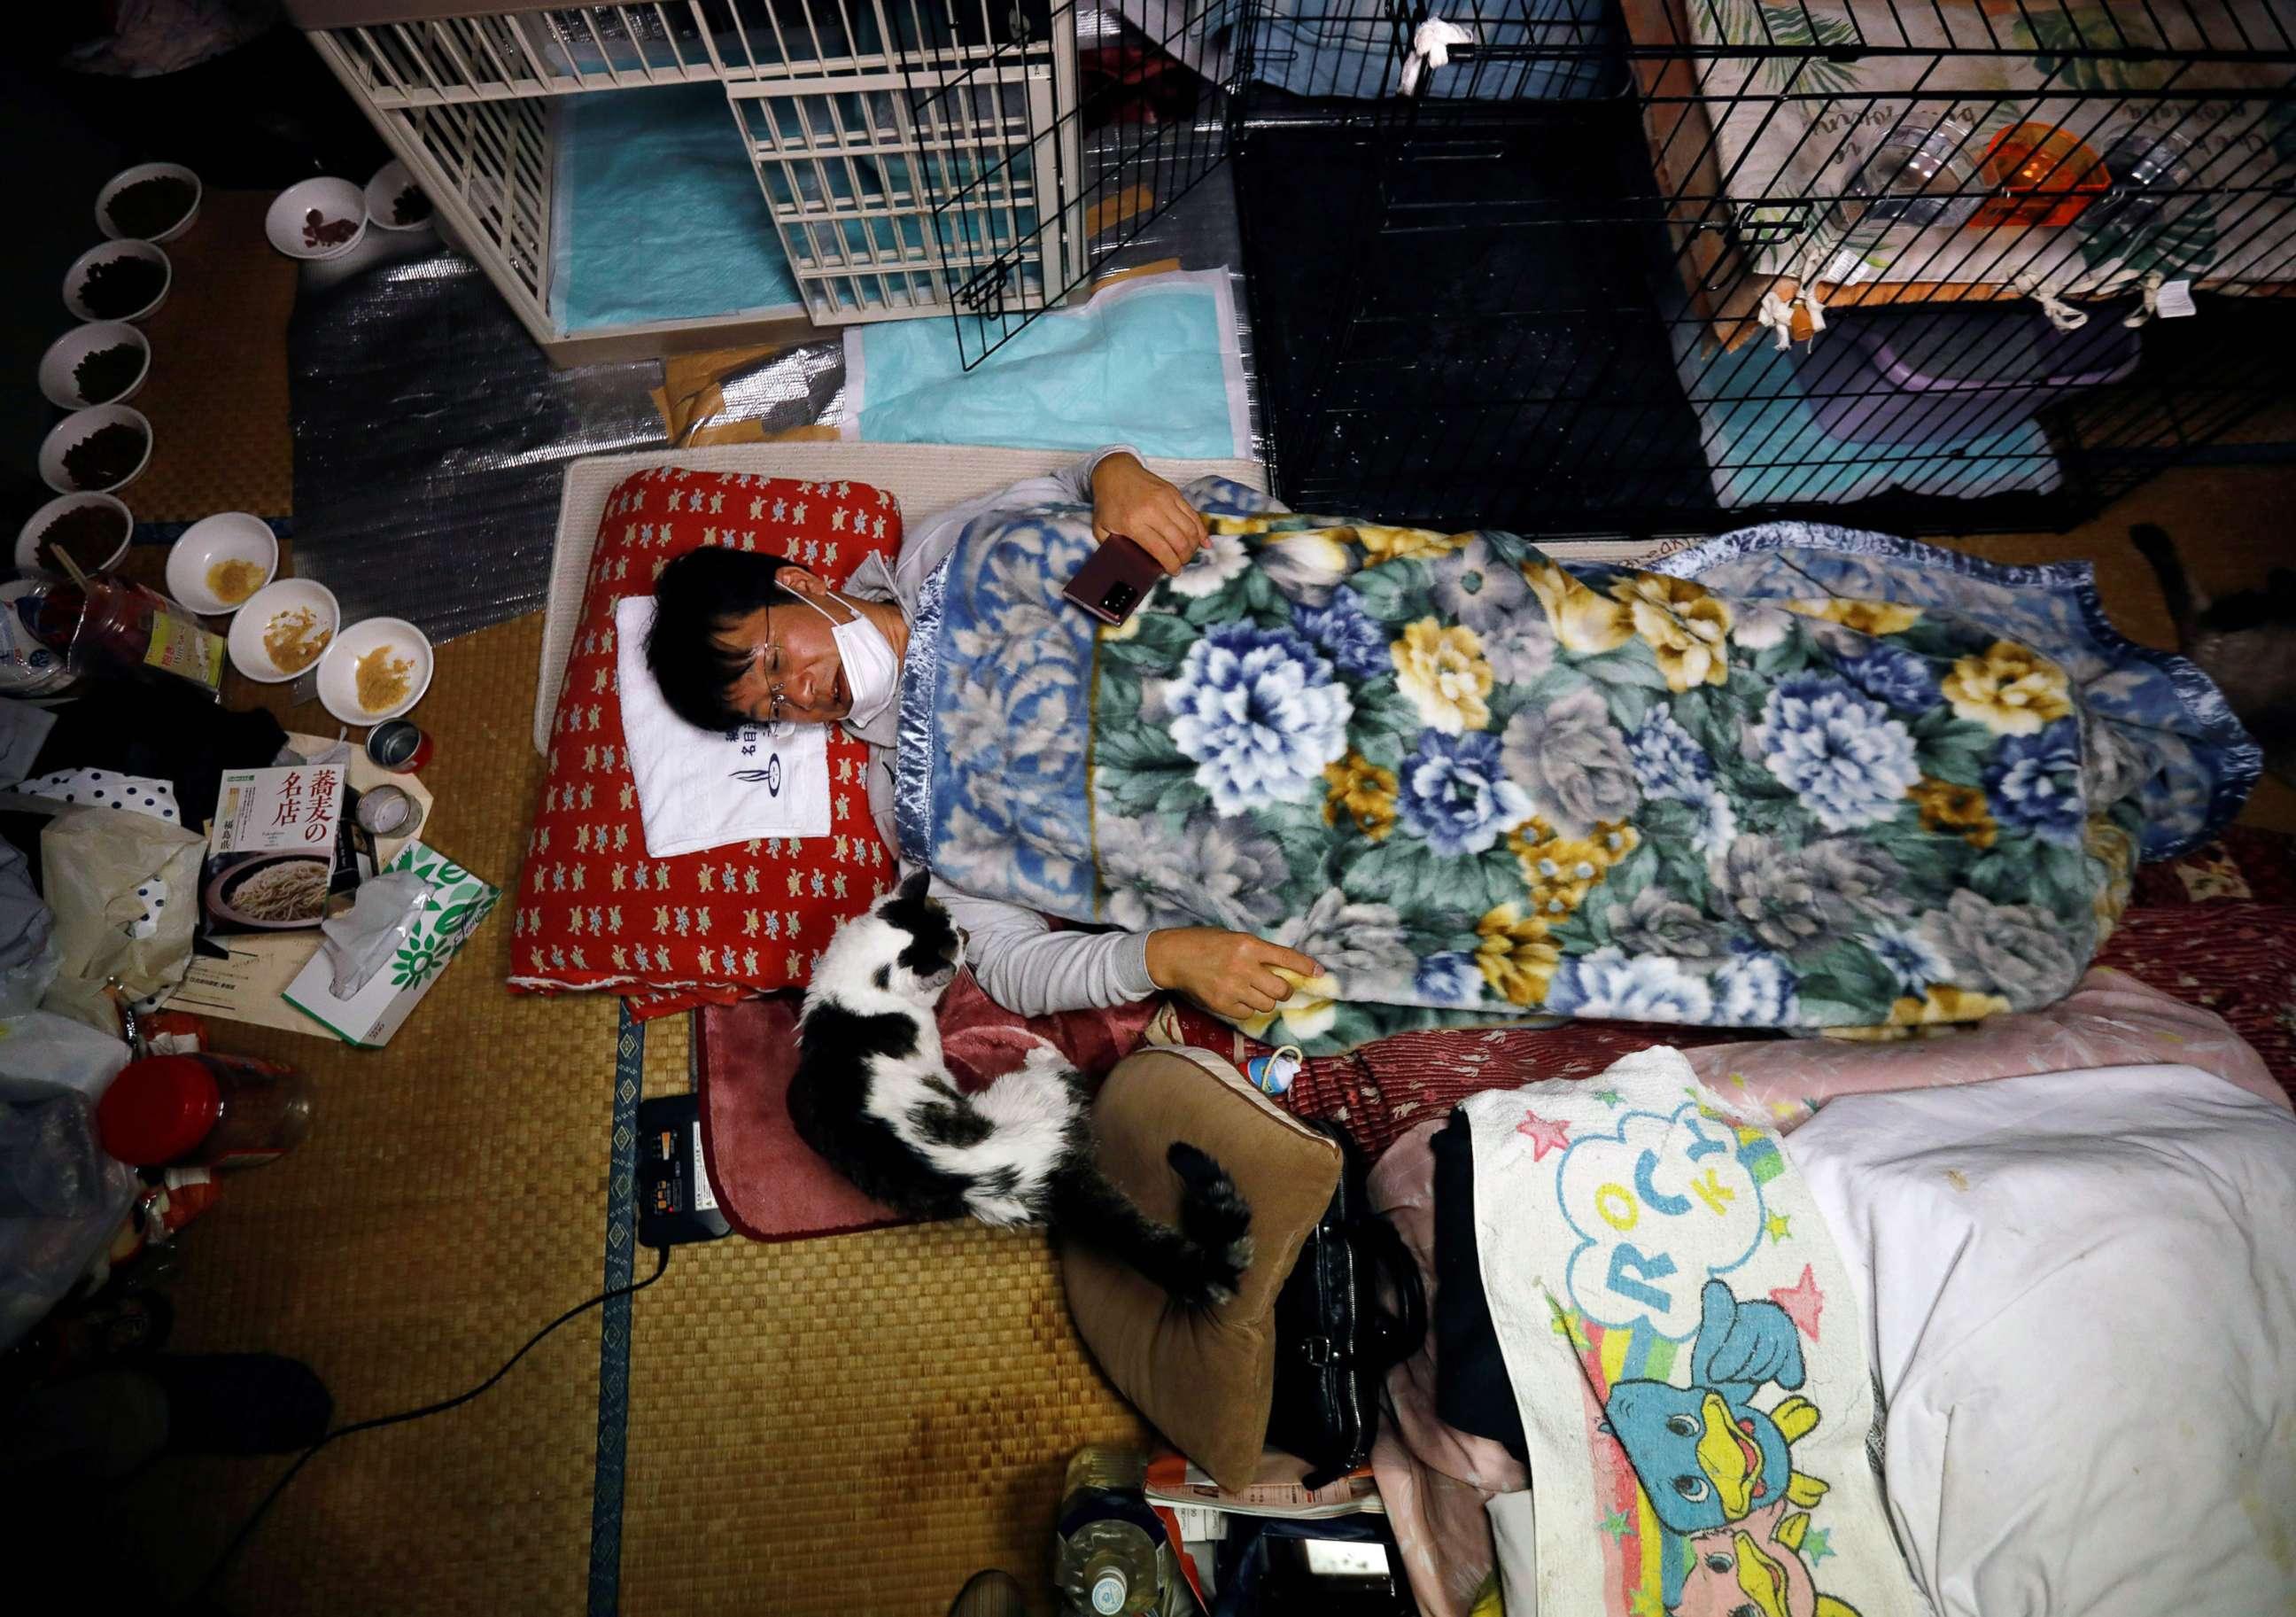 PHOTO: Sakae Kato lies in bed next to Charm, a cat who he rescued five years ago who is infected with feline leukemia virus, at his home in a restricted zone in Namie, Fukushima Prefecture, Japan, Feb. 20, 2021.